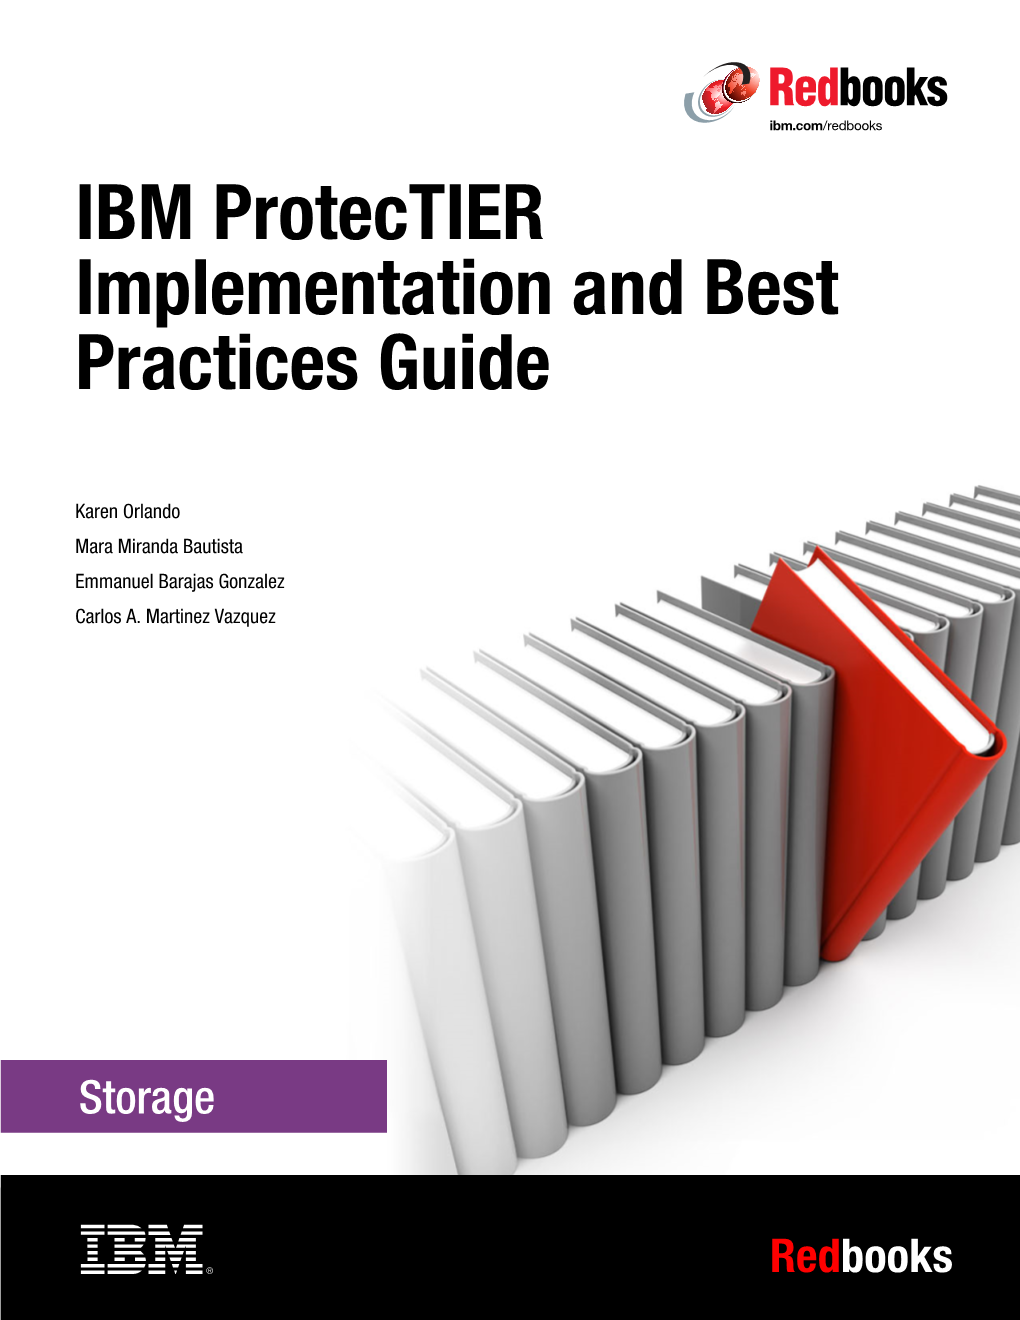 IBM Protectier Implementation and Best Practices Guide